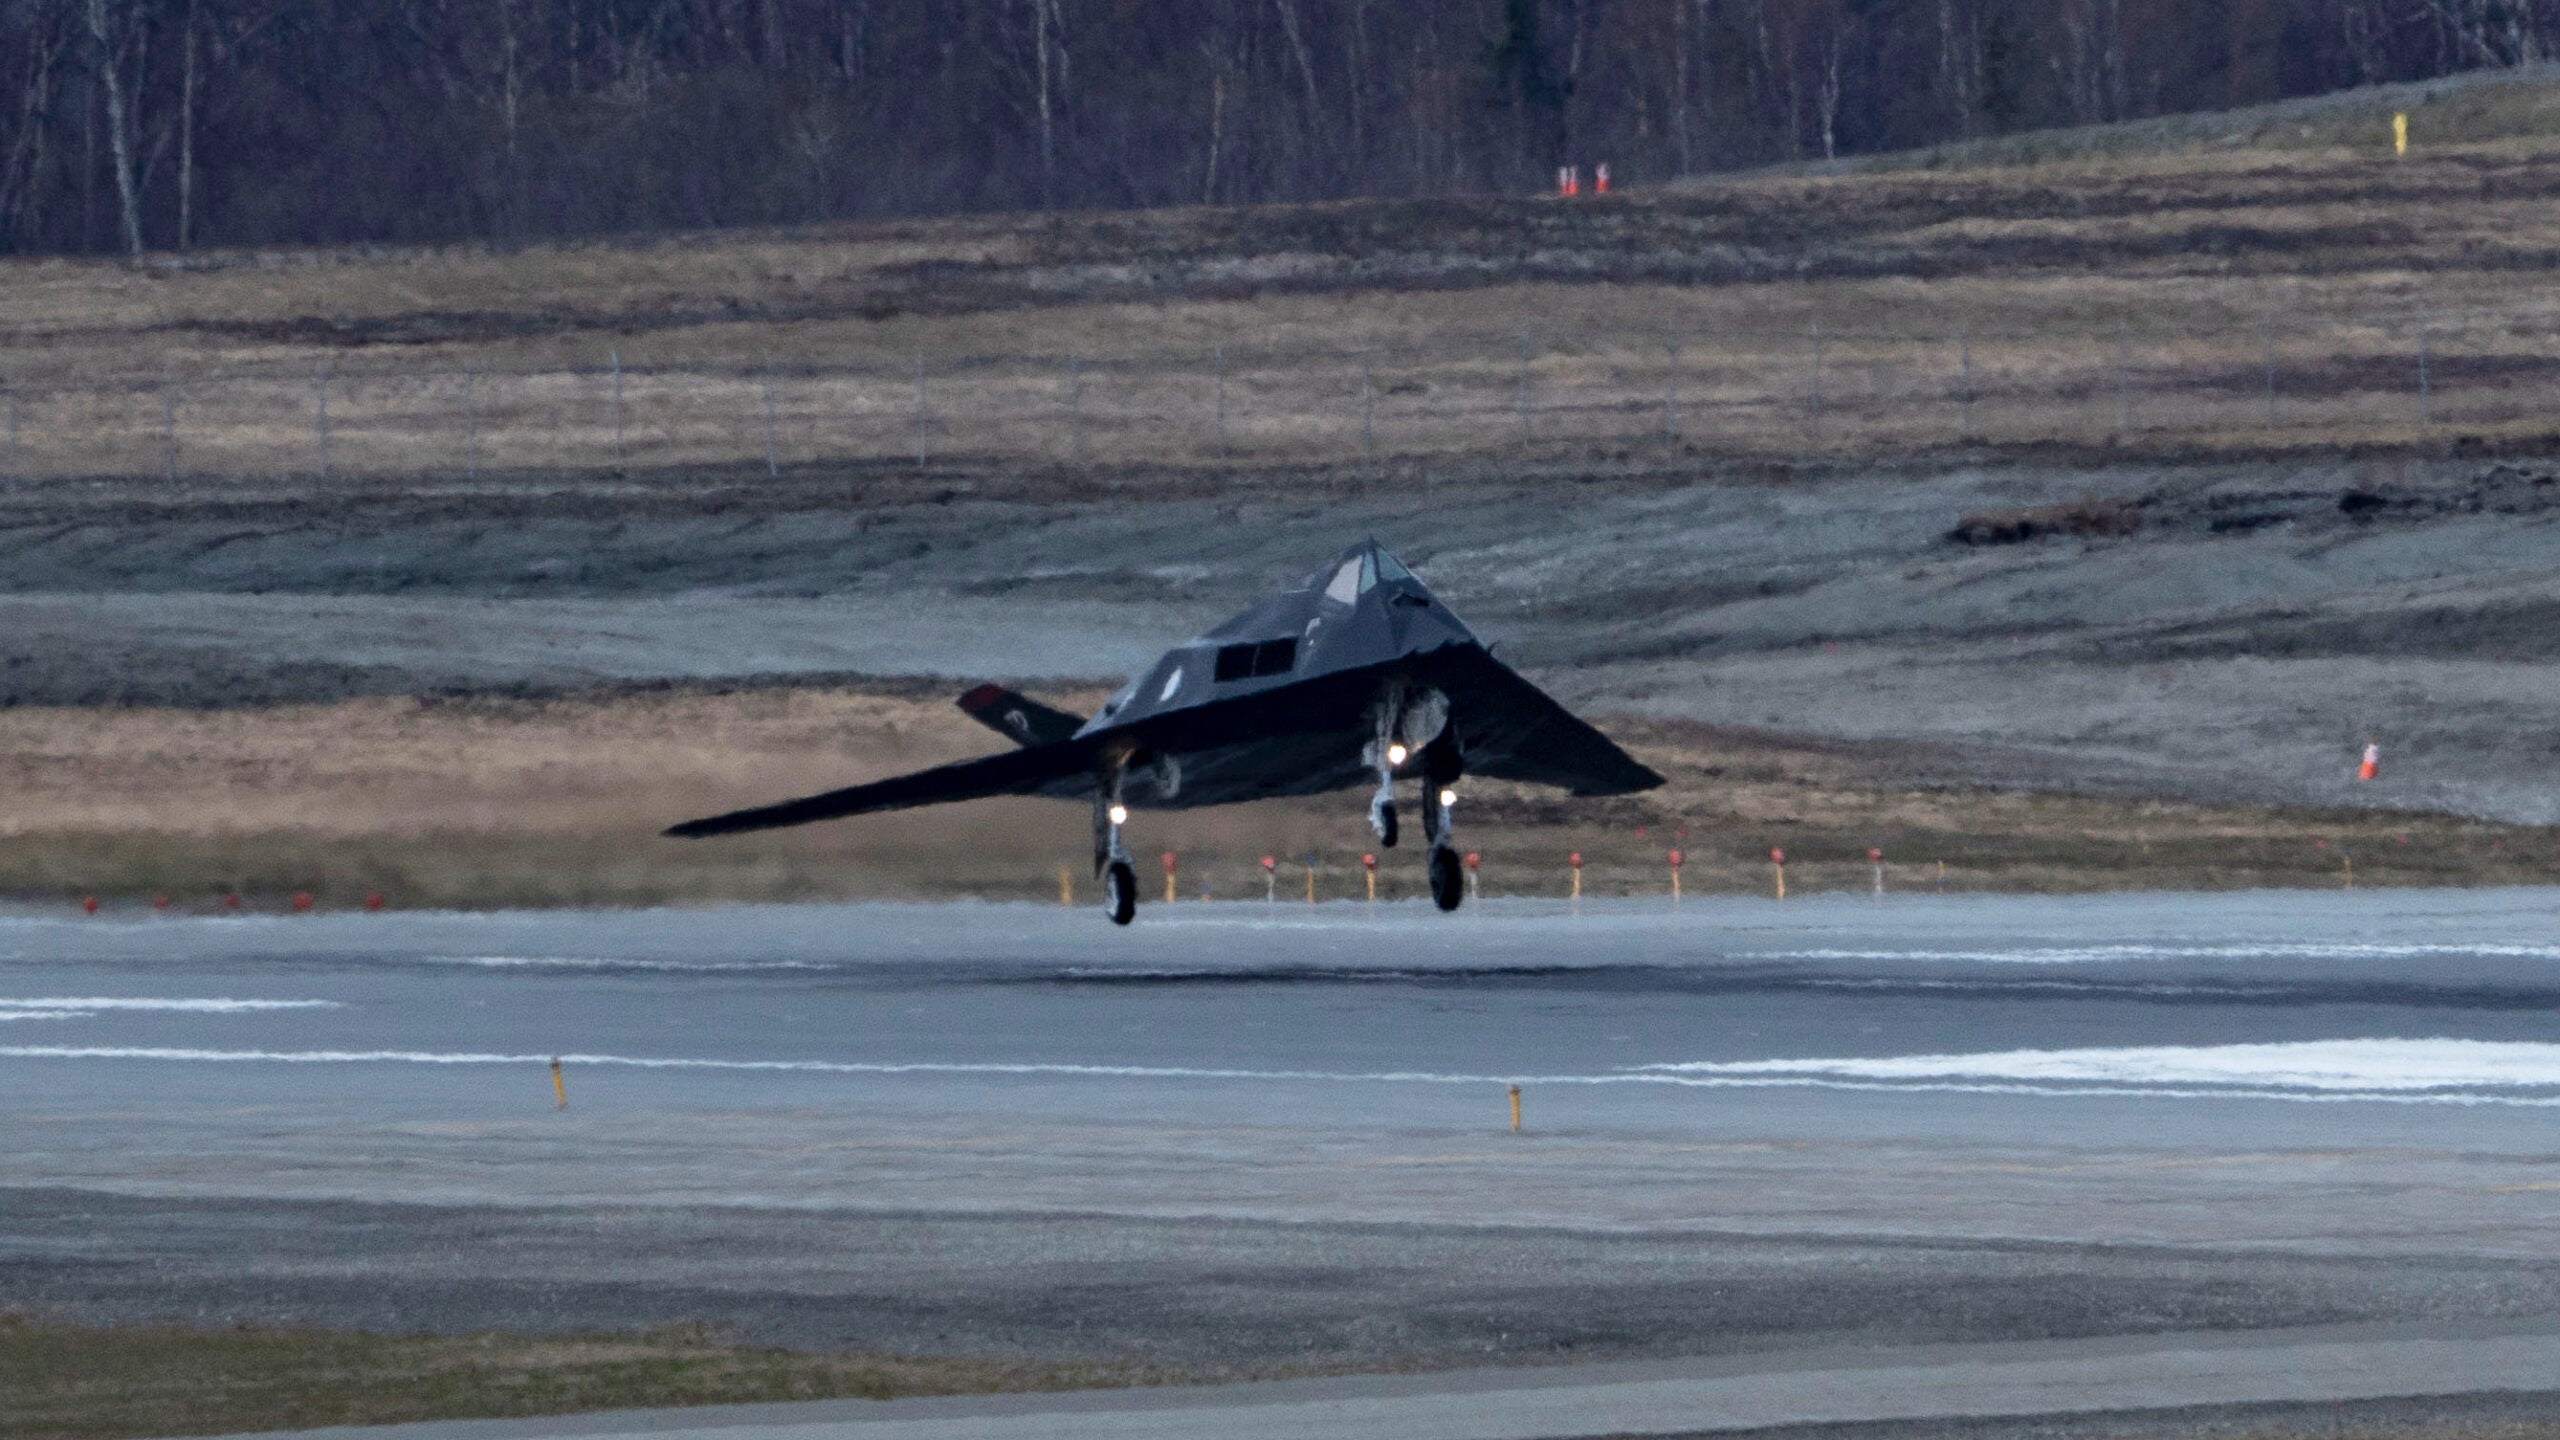 A U.S. Air Force F-117 Nighthawk lands during Northern Edge 23-1 at Joint Base Elmendorf-Richardson, Alaska, May 10, 2023. Northern Edge 23-1 provides an opportunity for joint, multinational and multi-domain operations designed to implement high-end, realistic war fighter training, develop and improve joint interoperability, and enhance the combat readiness of participating forces. (U.S. Air Force photo by Airman 1st Class Julia Lebens)